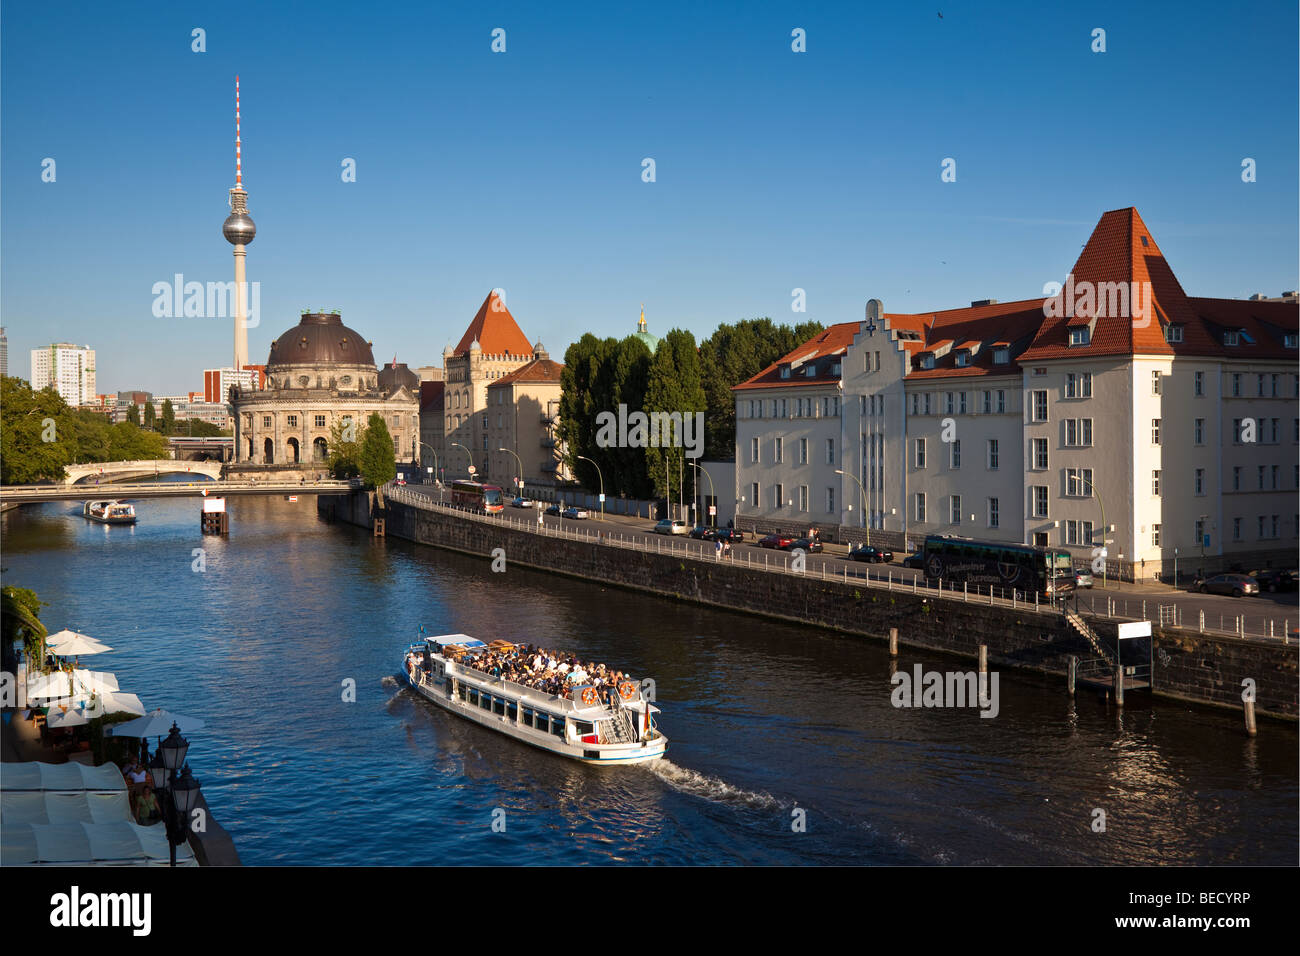 The river Spree with a tourist boat. In the background are the Bode Museum and the television tower. Stock Photo